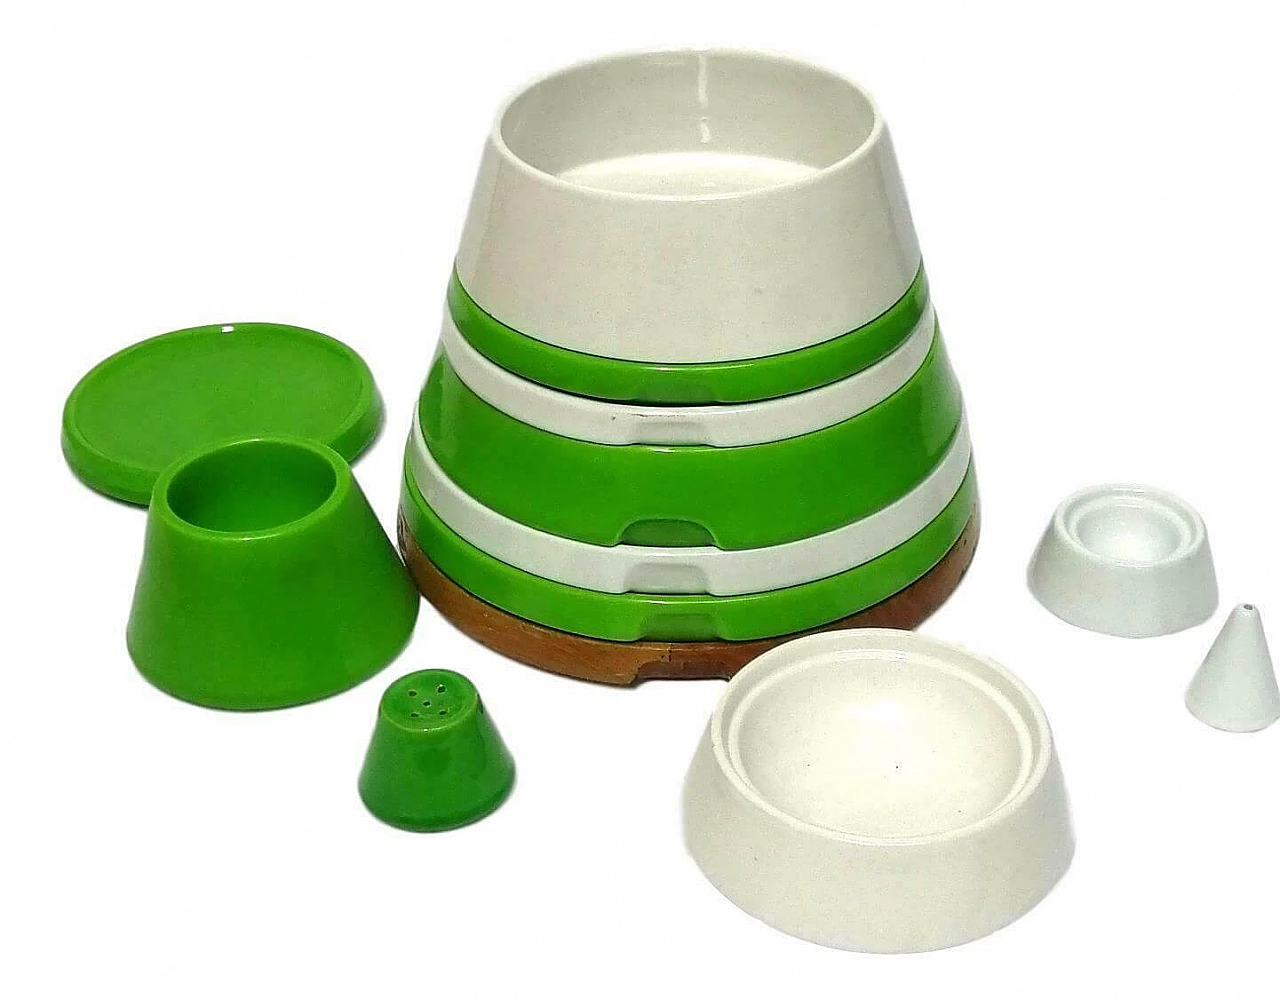 Ceramic tableware Cone designed by Ettore Sottsass for Pierre Cardin, produced by Franco Pozzi, 1969 1168081